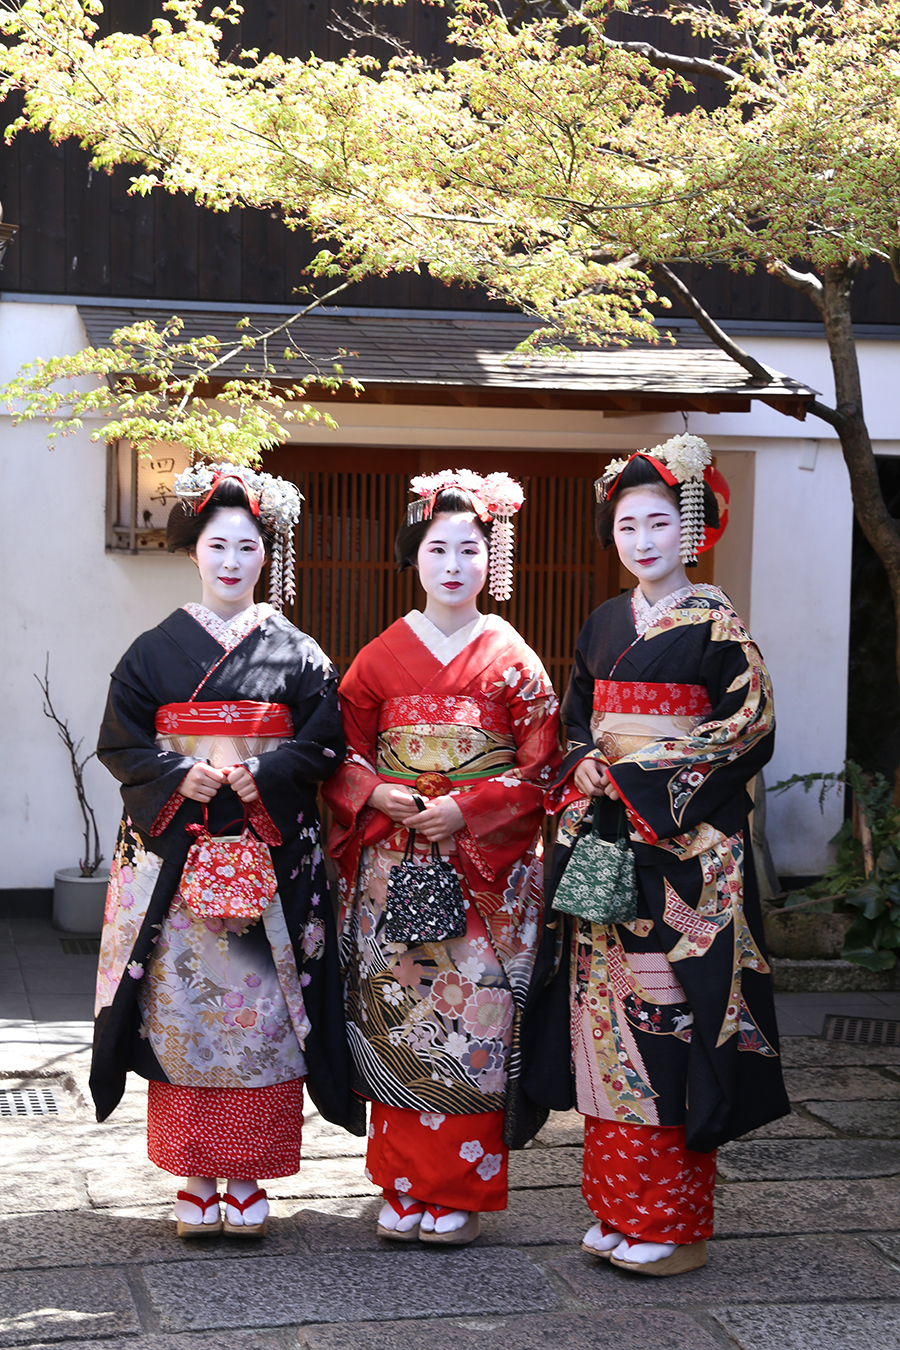 Ever wanted to live out your best Japanese fantasy? I did just that, wearing a kimono in Gion, the most famous geisha district in all of Japan. This is my kimono rental experience in Kyoto.